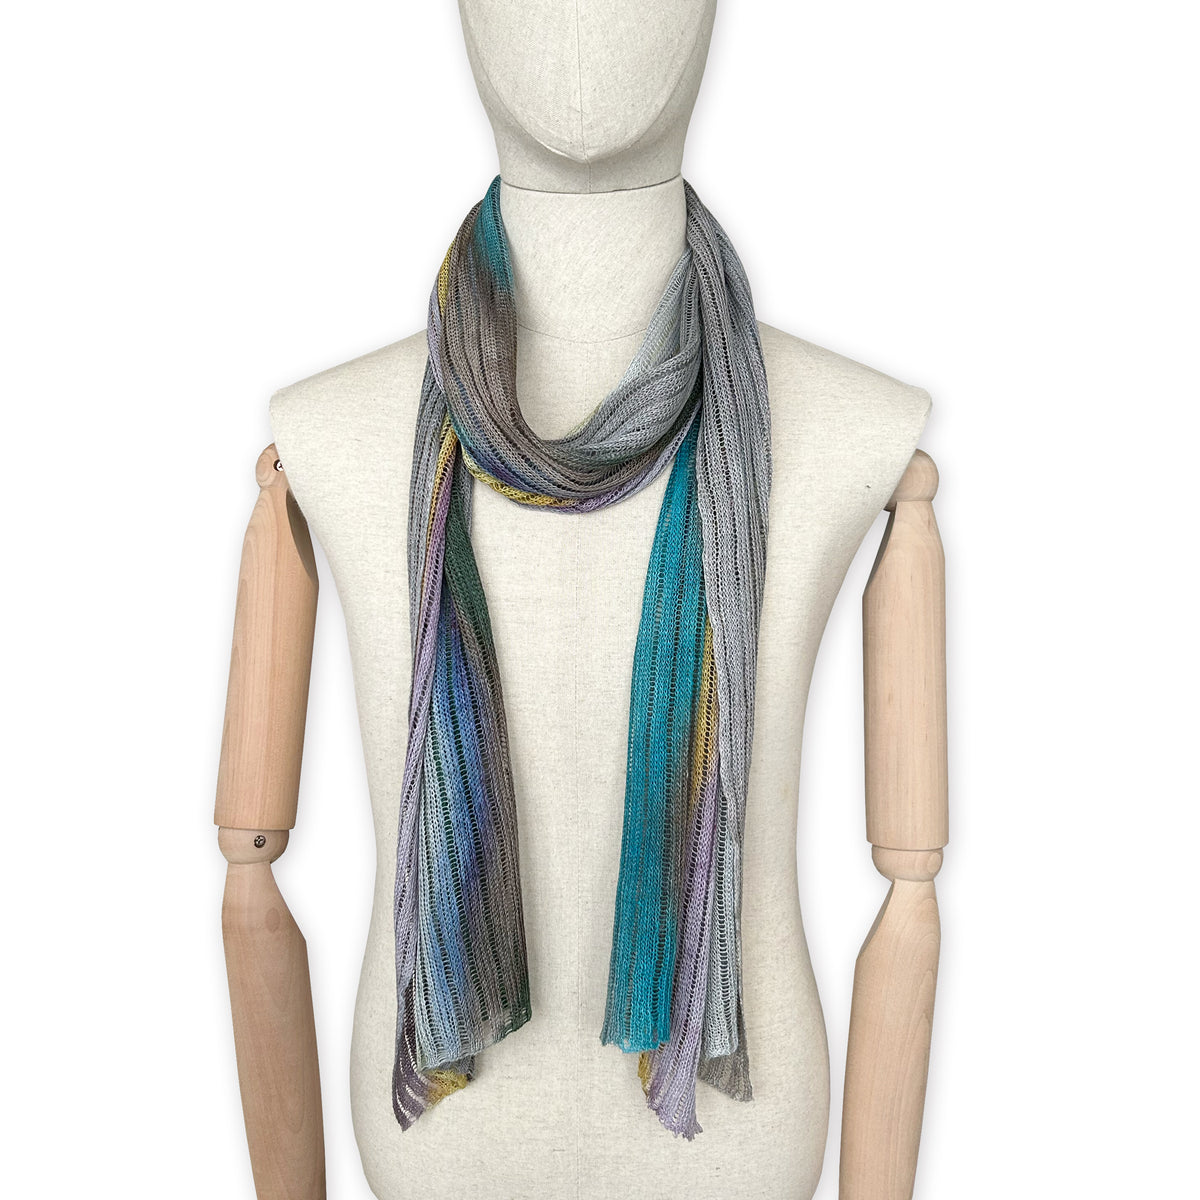 linen-scarf-hand-painted-35x200cm-gray-blue-green-otta-italy-2416